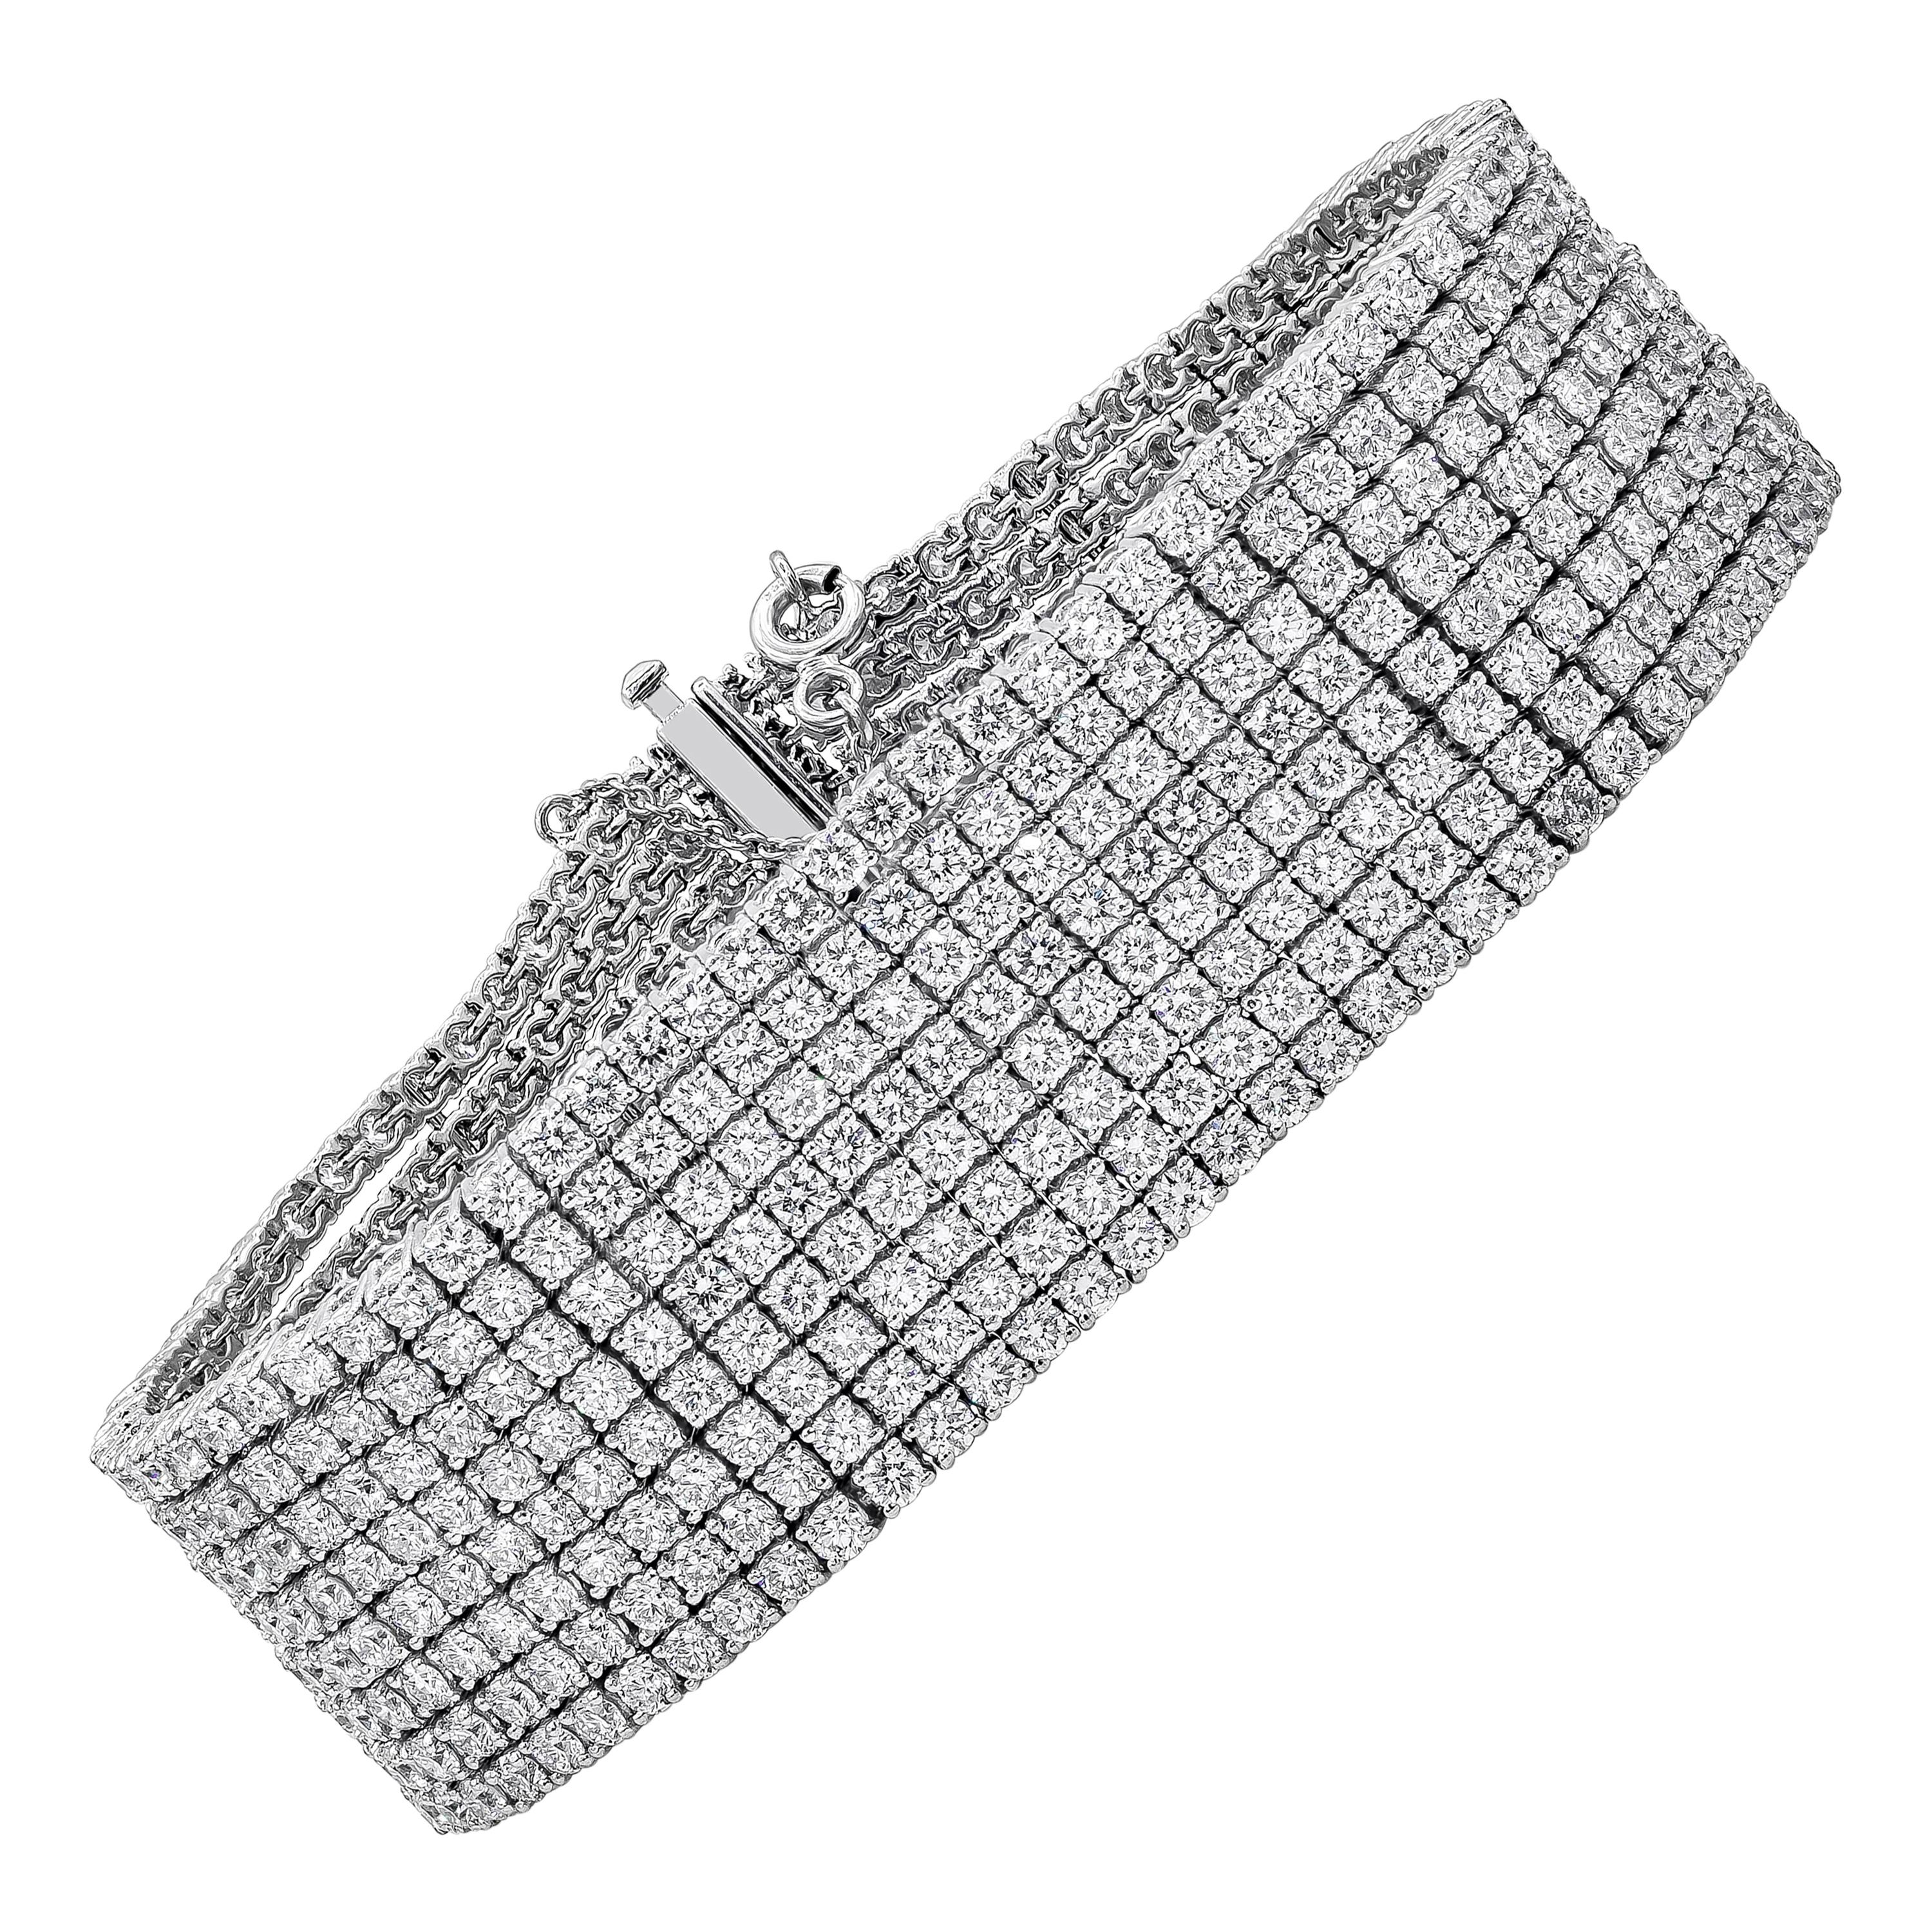 IN STOCK Invisible Set 4.2mm Tennis Bracelet - Size 6